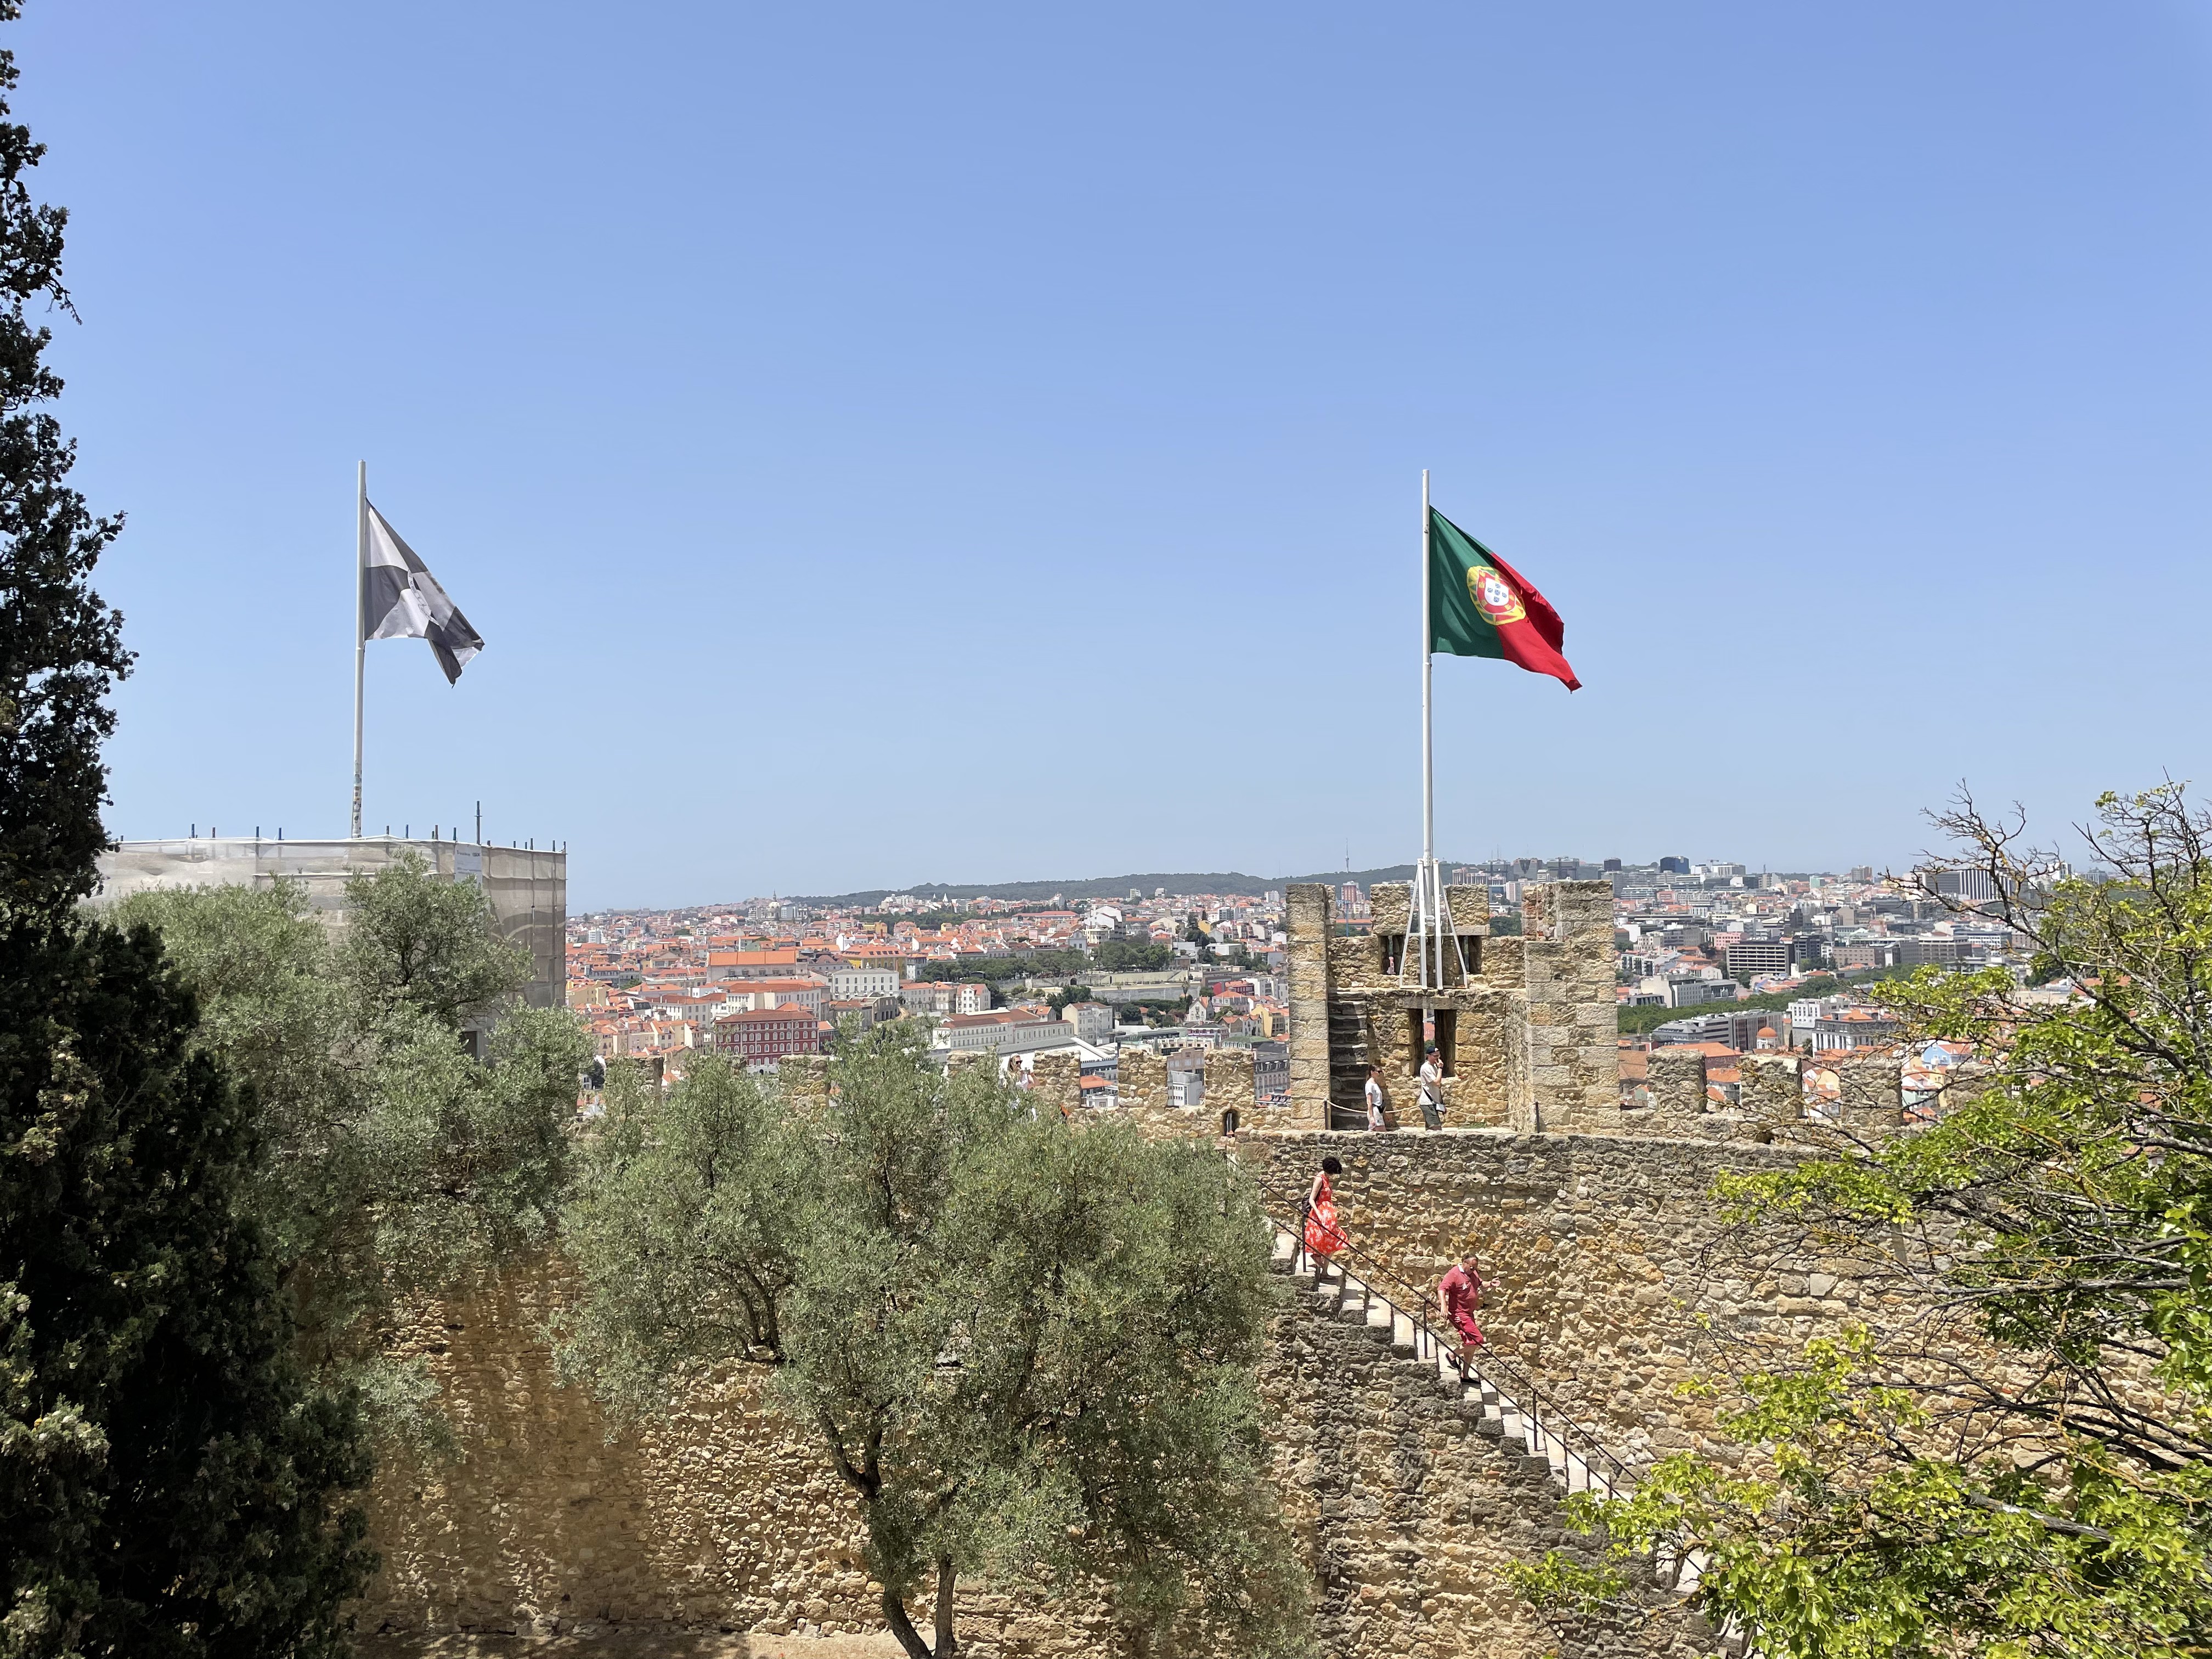 A view of the castle walls with the Portuguese flag flying
               atop. The city can be seen in the background.